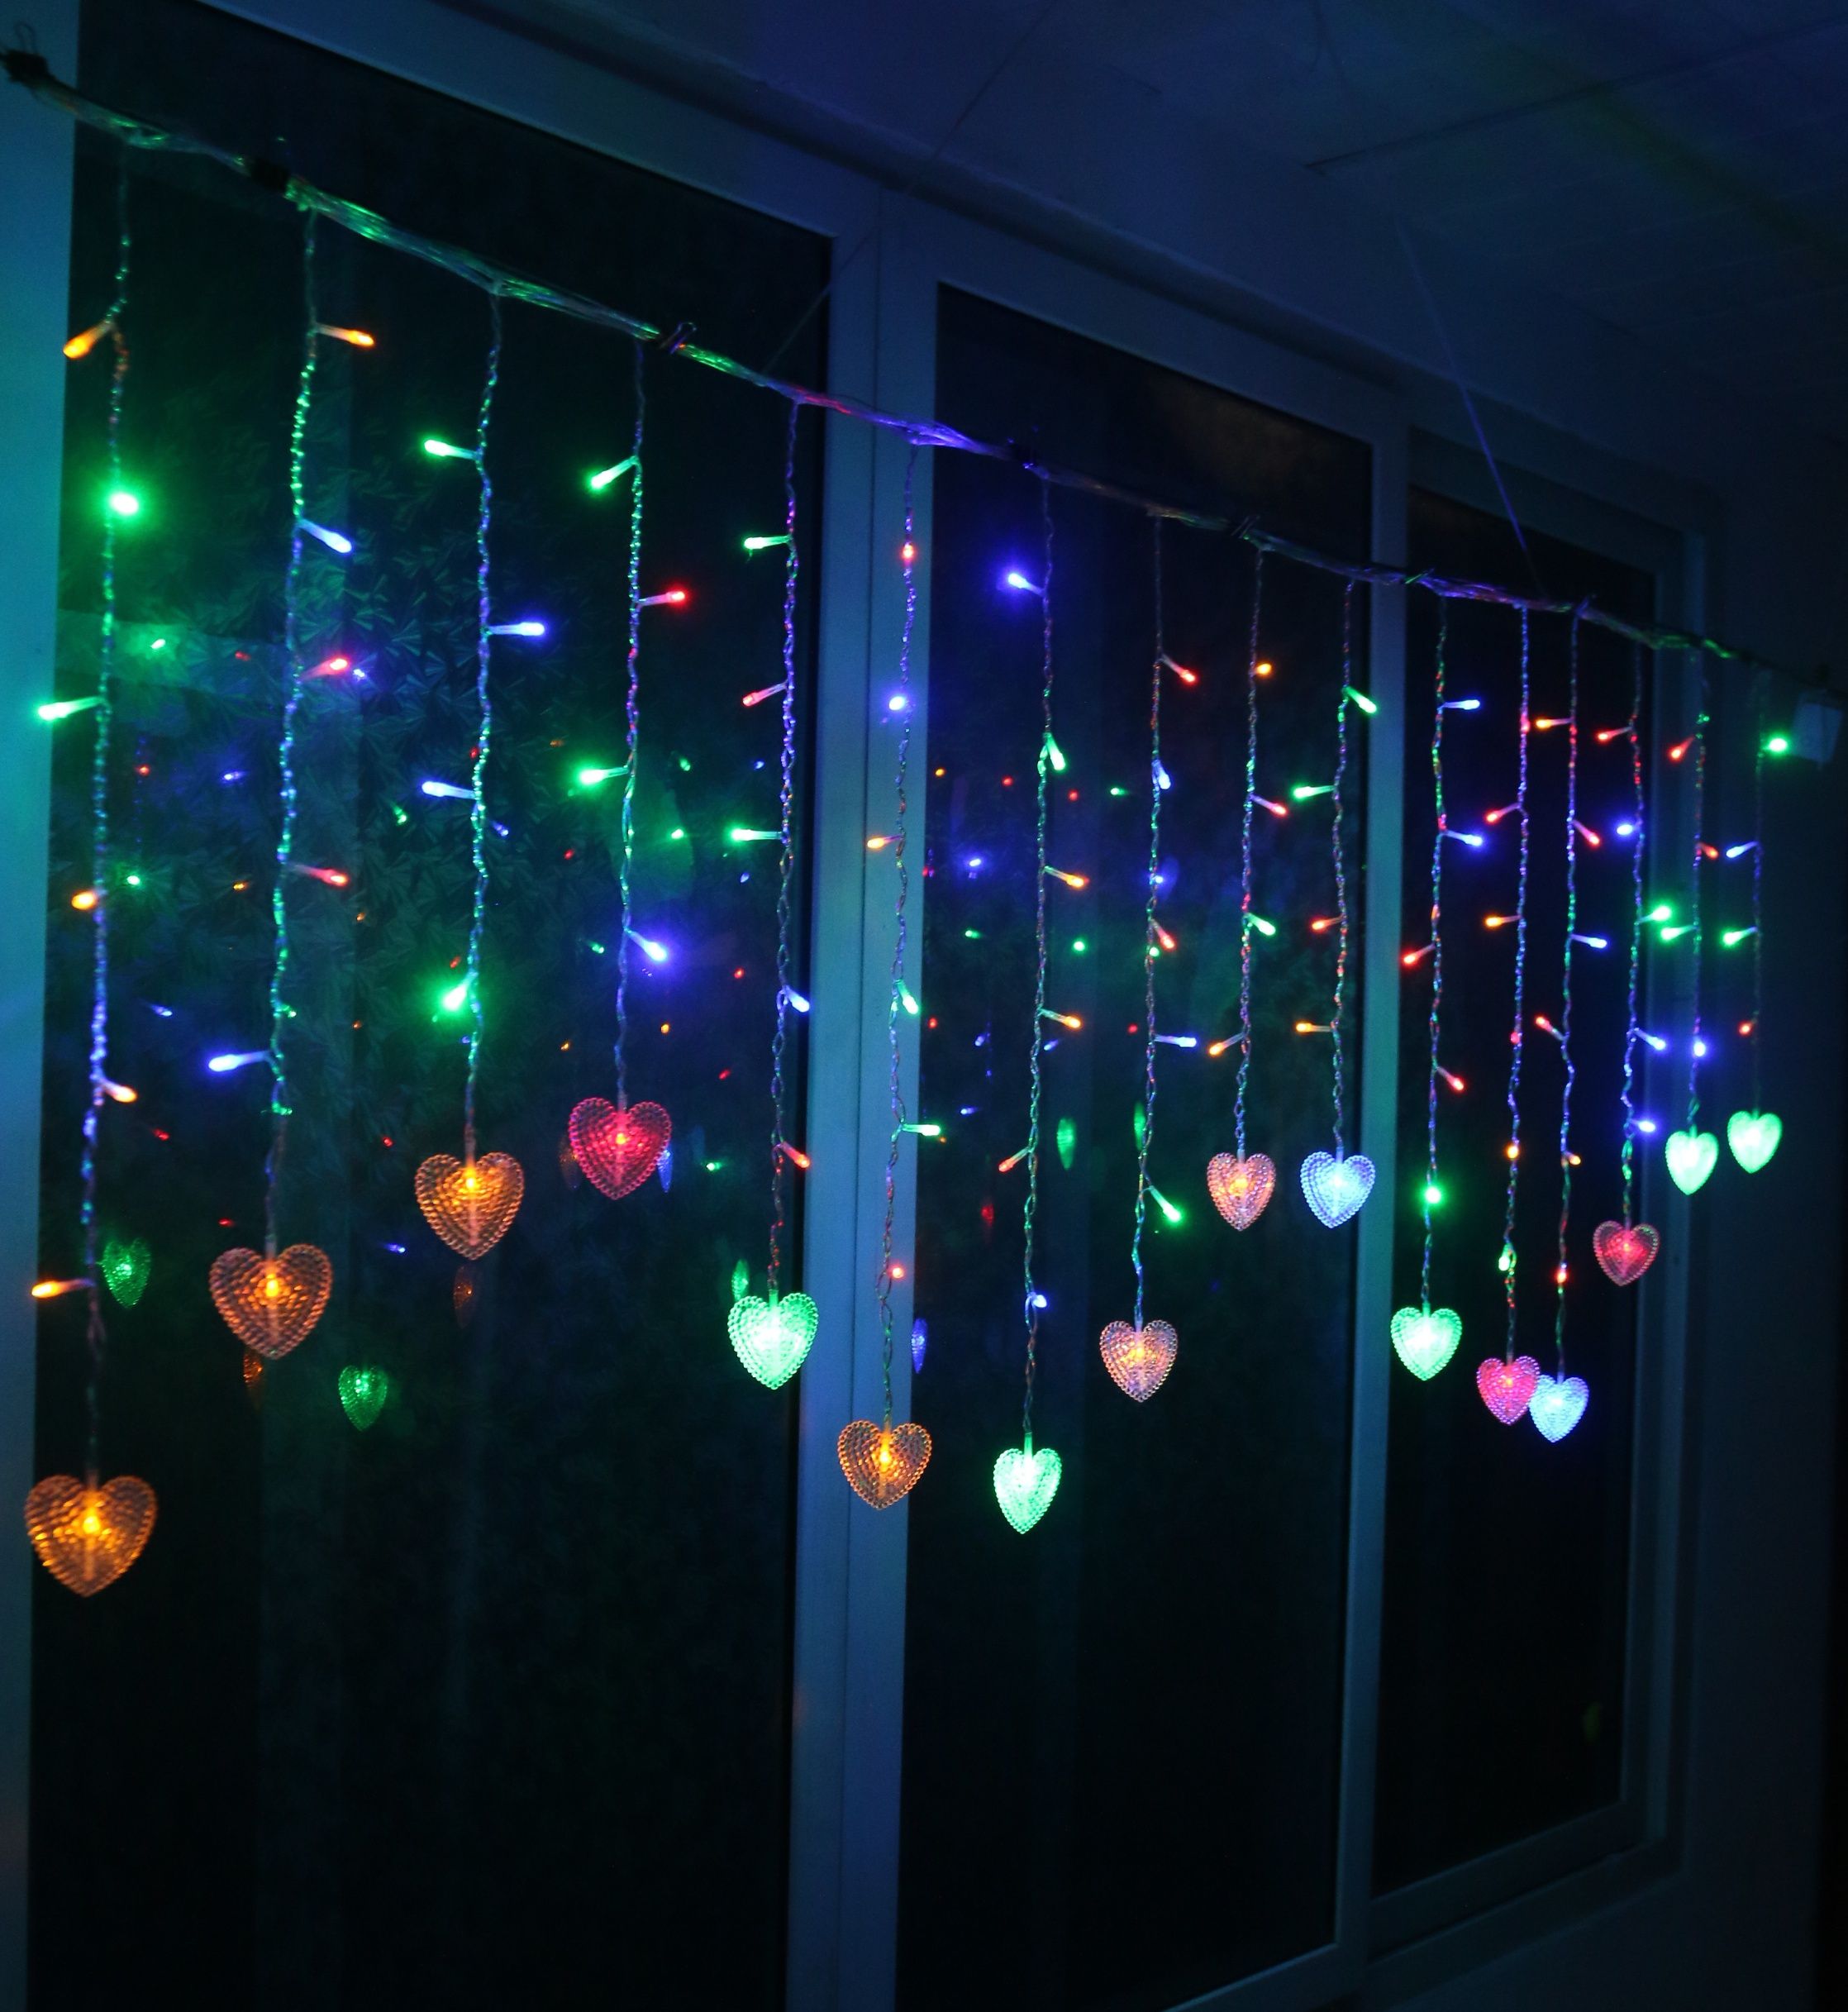 96 Leds 35M Ice Heart Leds Silver Wire Fair Carland Lamp Led String